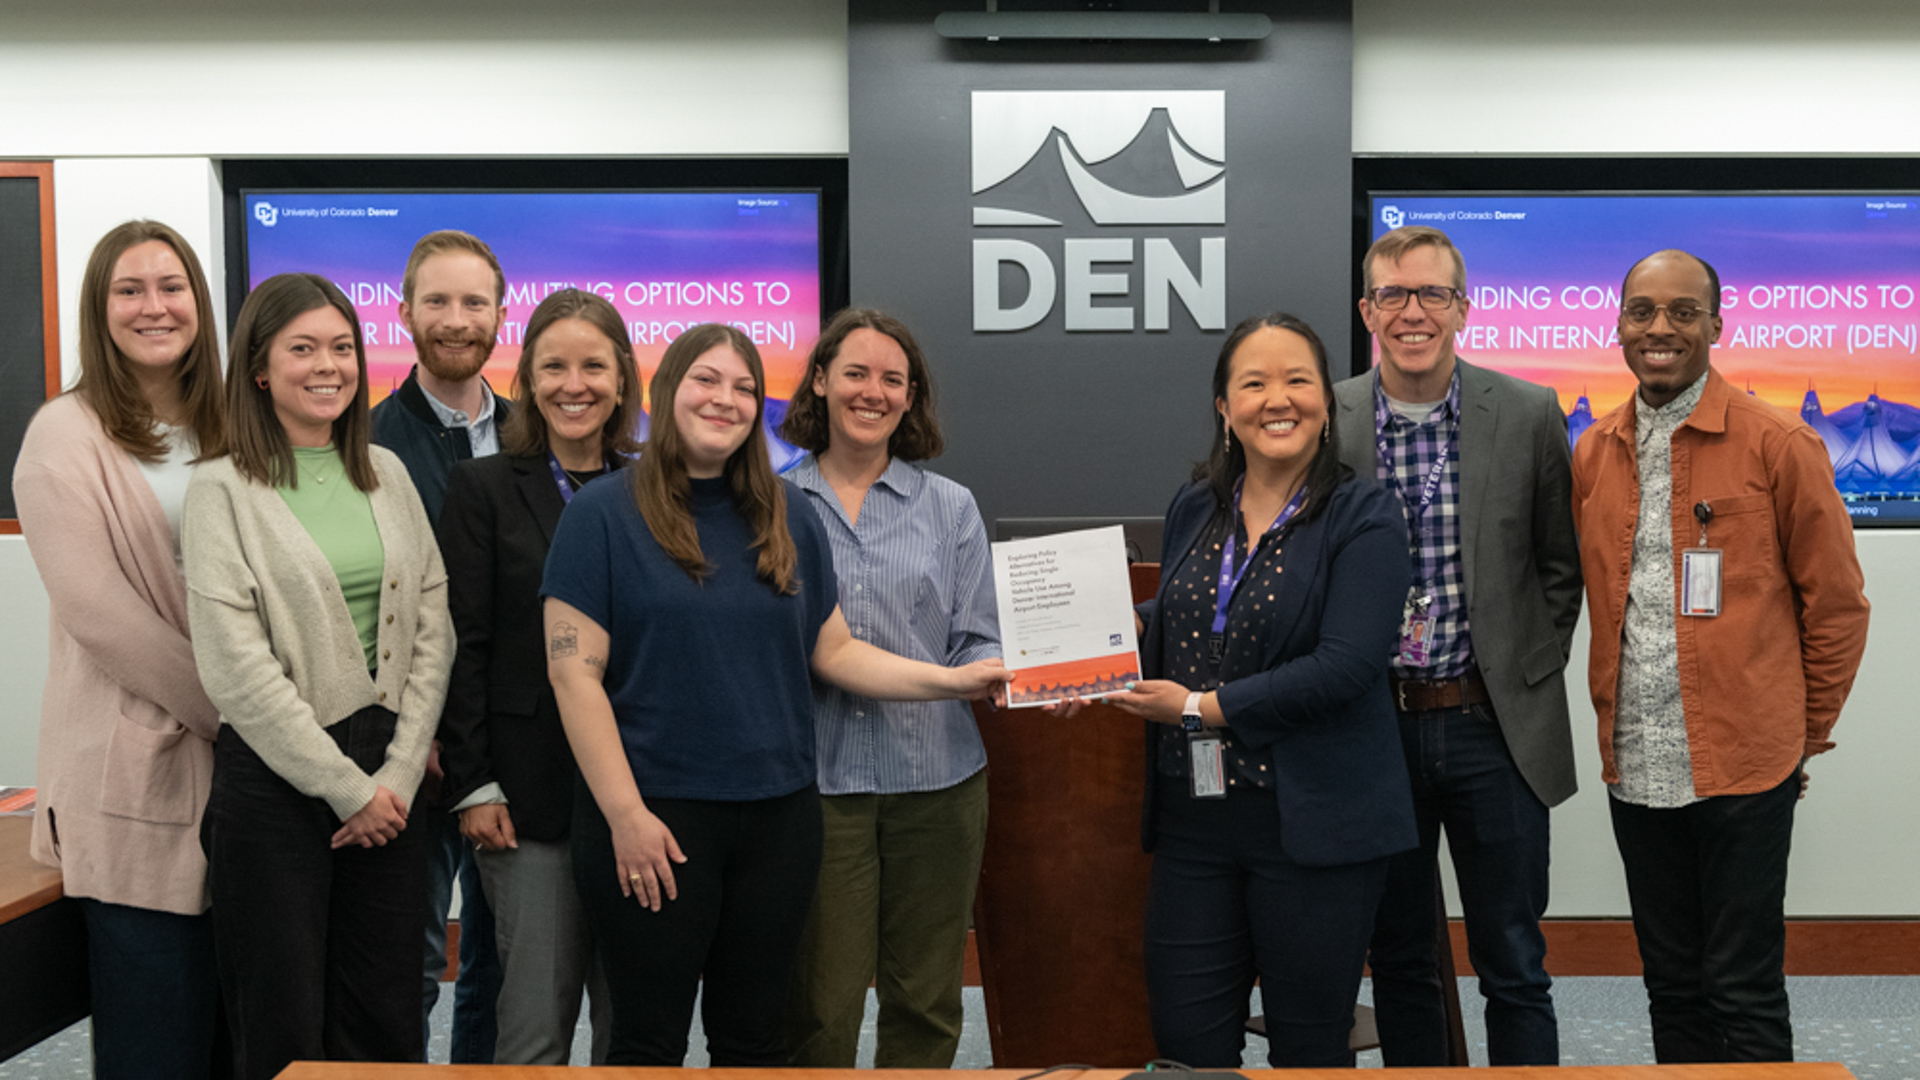 Students joined DEN staff at the airport holding their final presentation.